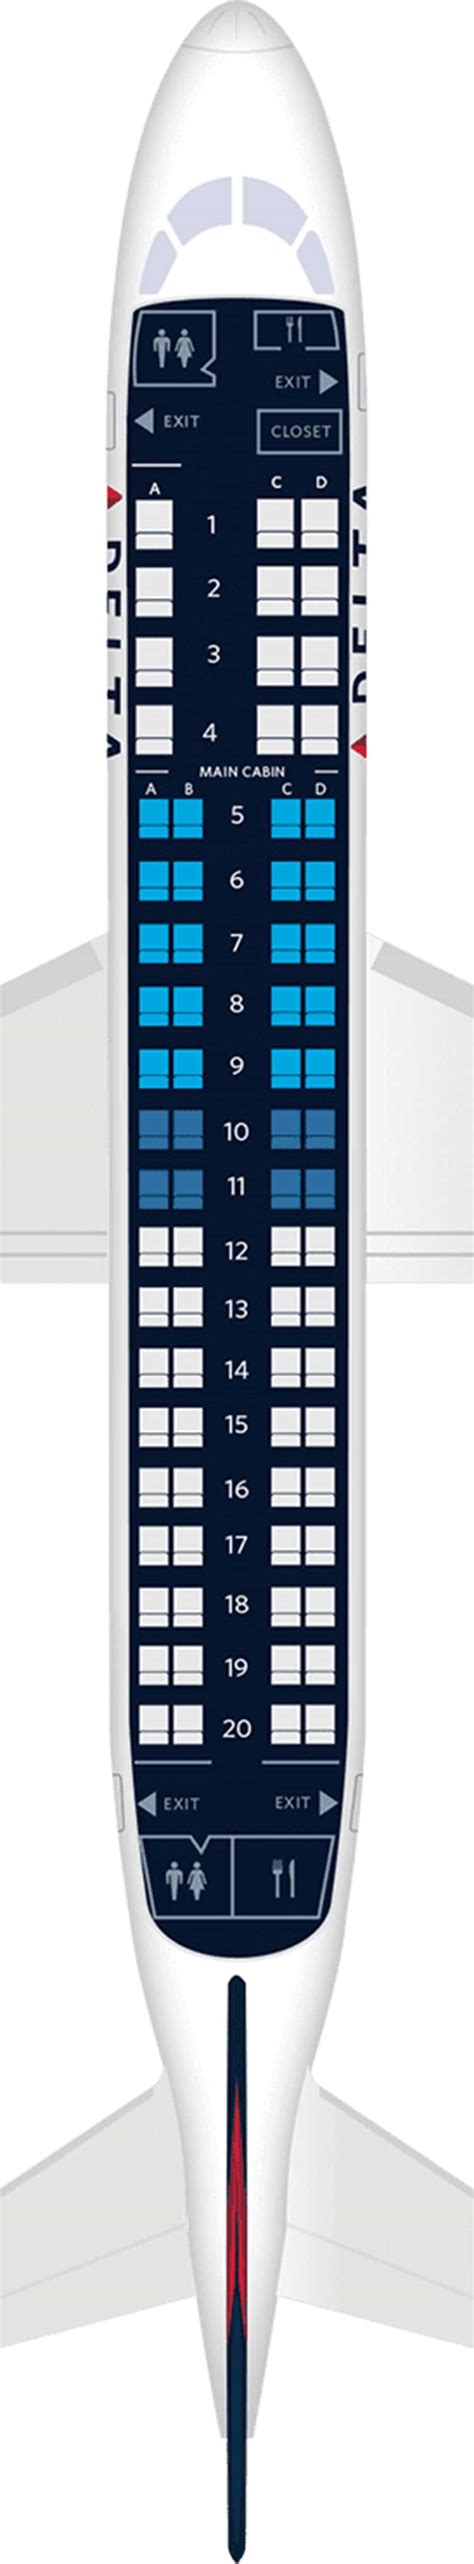 Embraer erj 175 seat map. Things To Know About Embraer erj 175 seat map. 